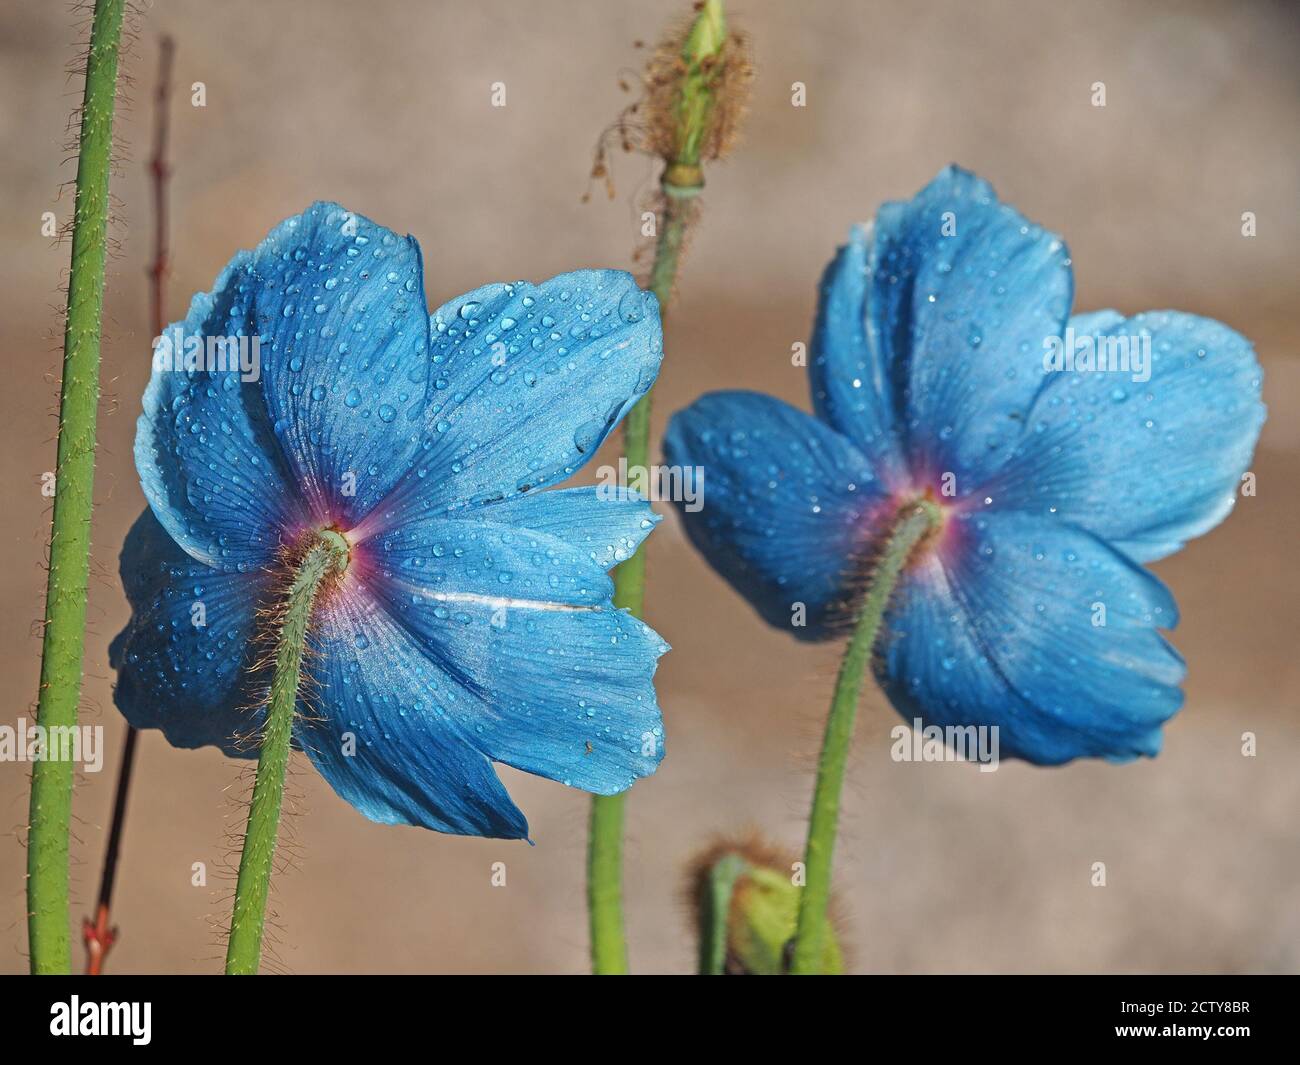 sparkling drops of dew on bright iridescent azure petals of Himalayan Blue Poppy (Meconopsis grandis) with green hairy stems against clear background Stock Photo